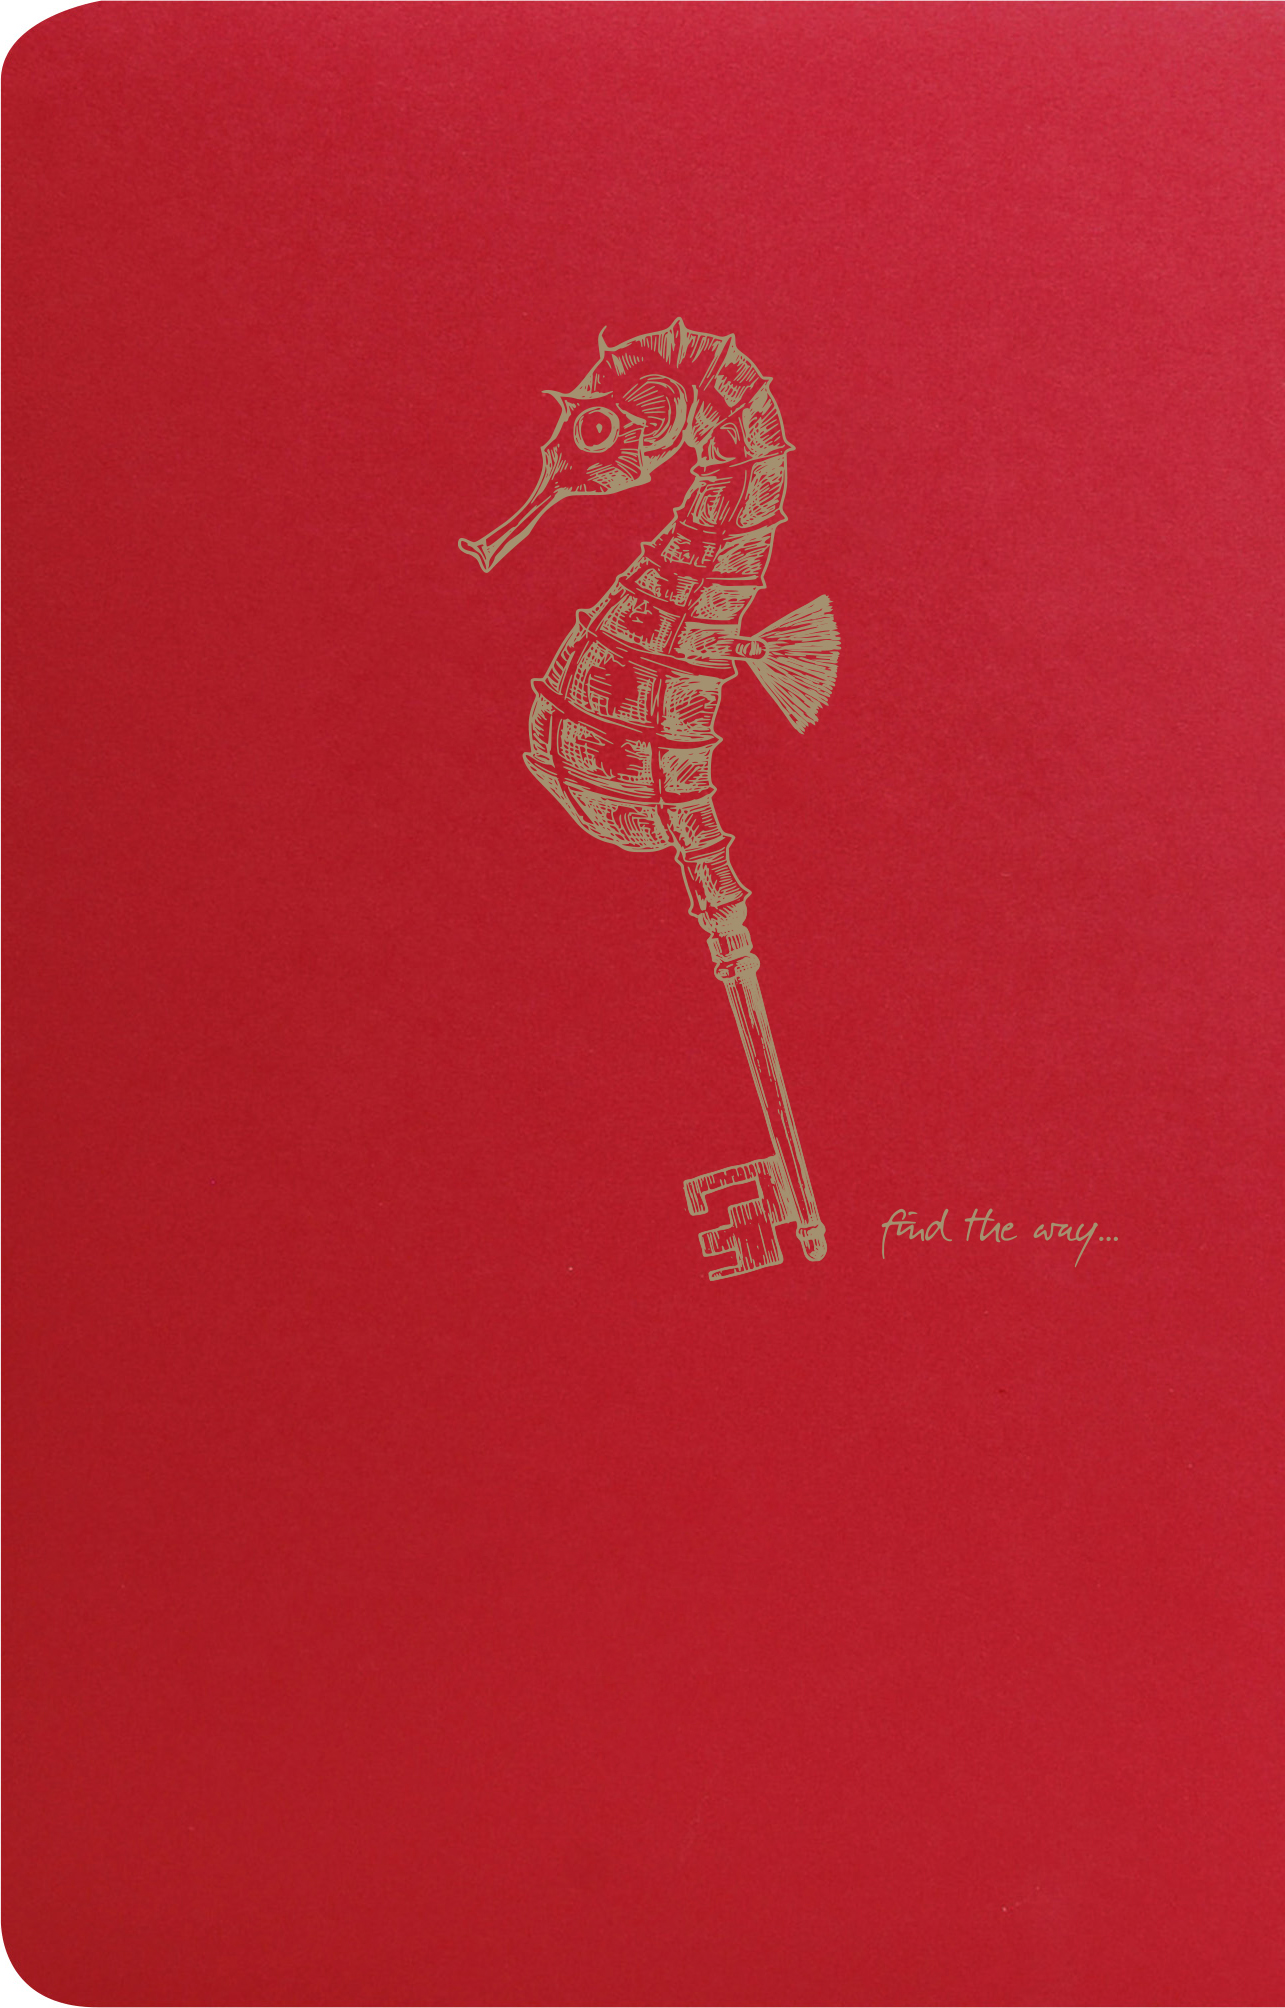 Clairefontaine Flying Spirit  11x17cm  - Red